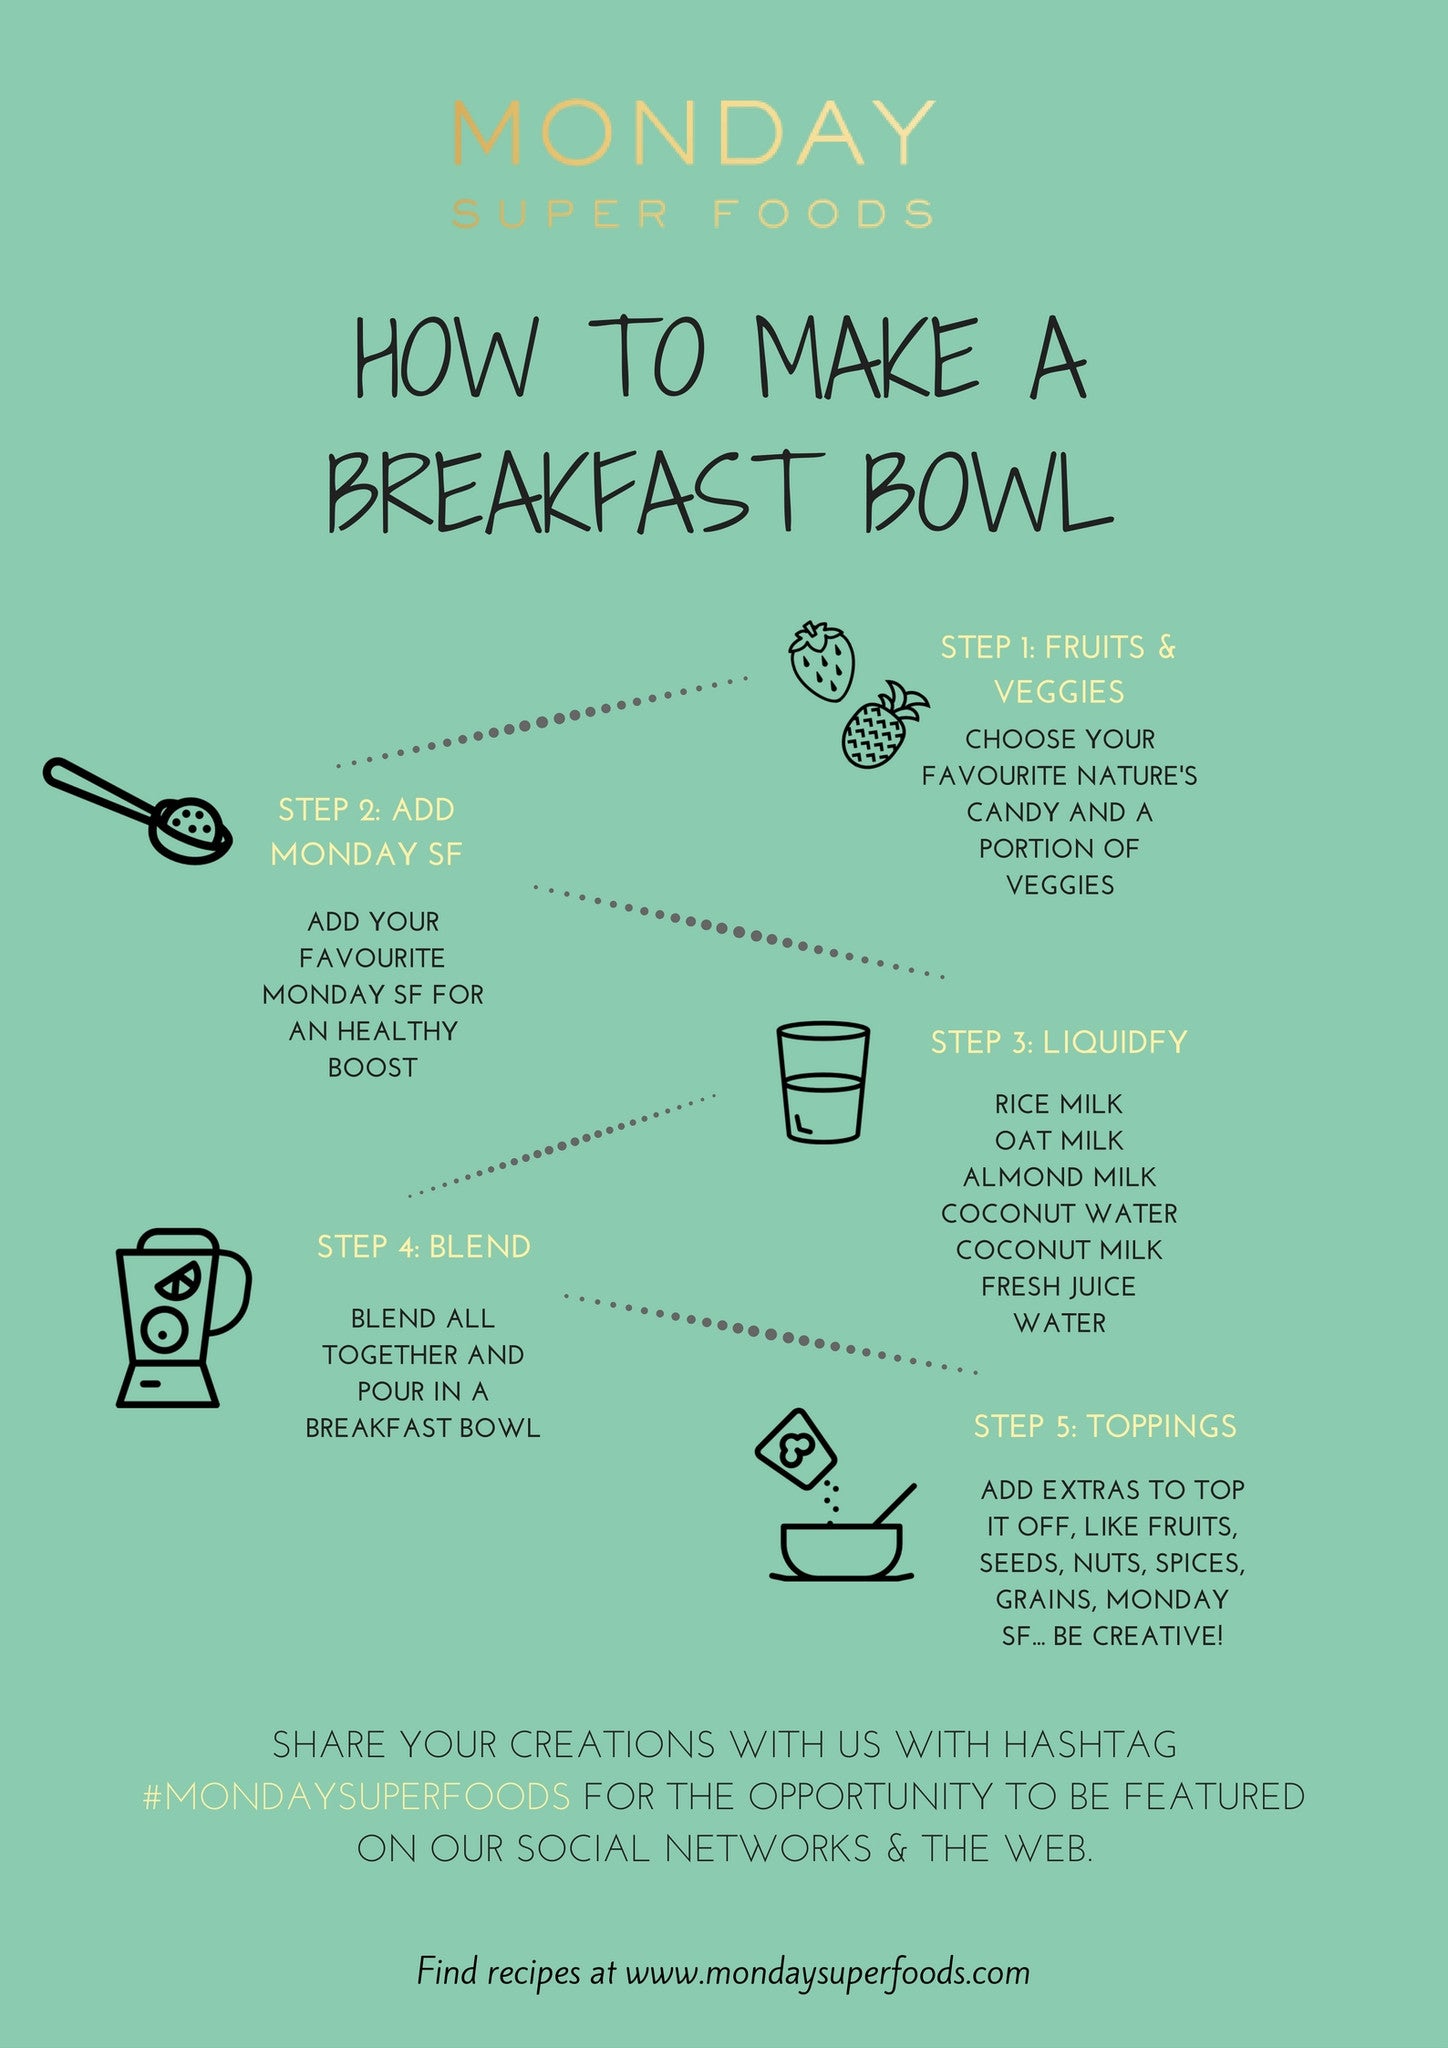 HOW TO MAKE A BREAKFAST BOWL